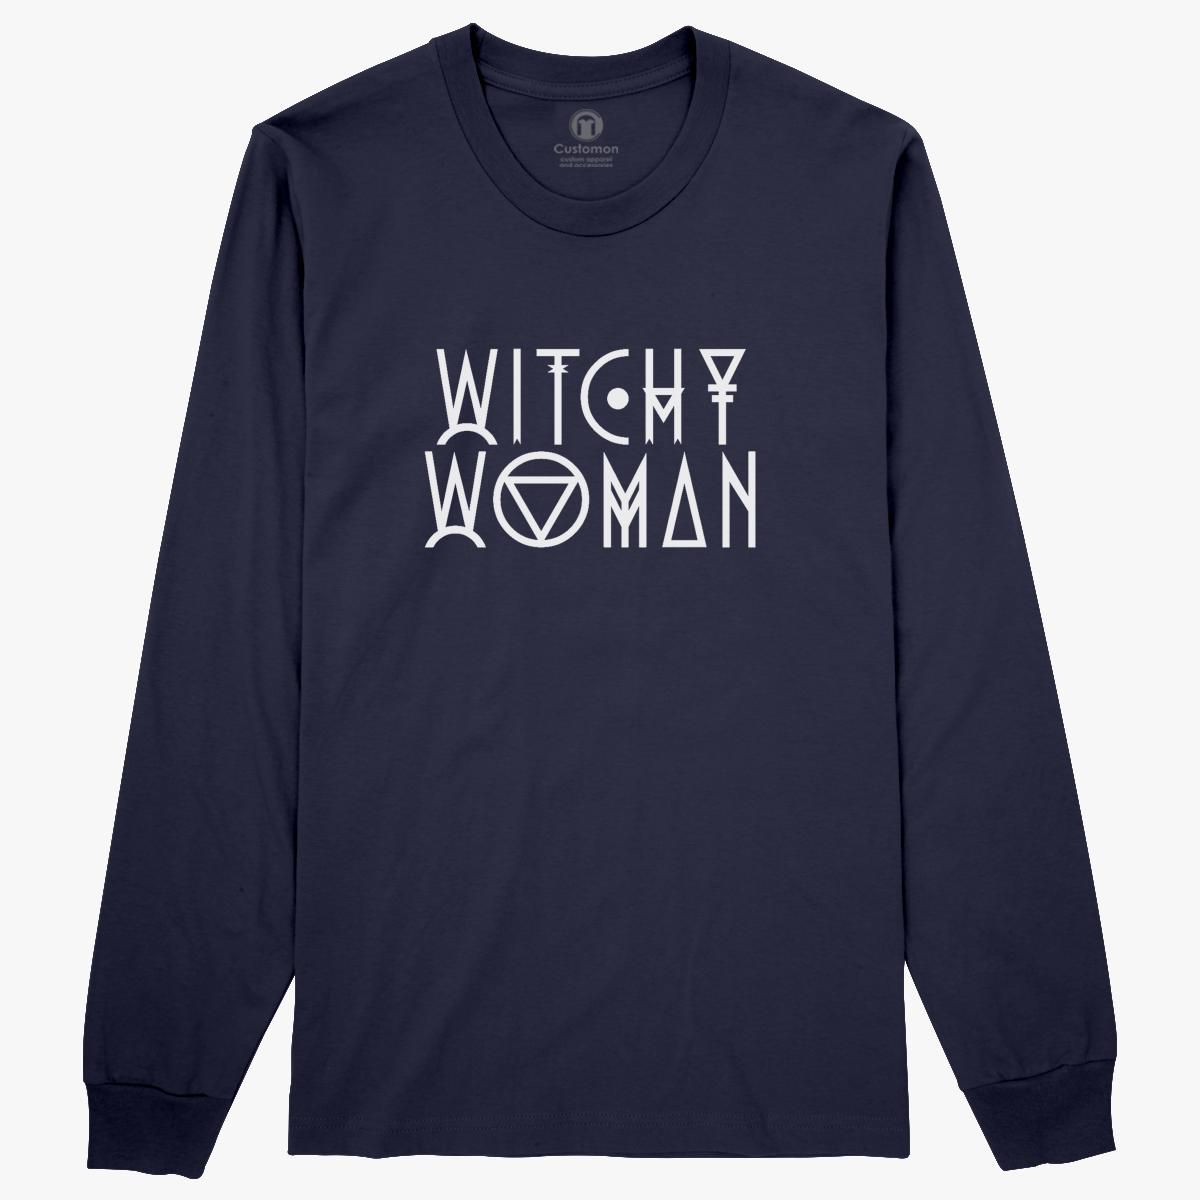 Download Witchy Woman Long Sleeve T-shirt - Customon